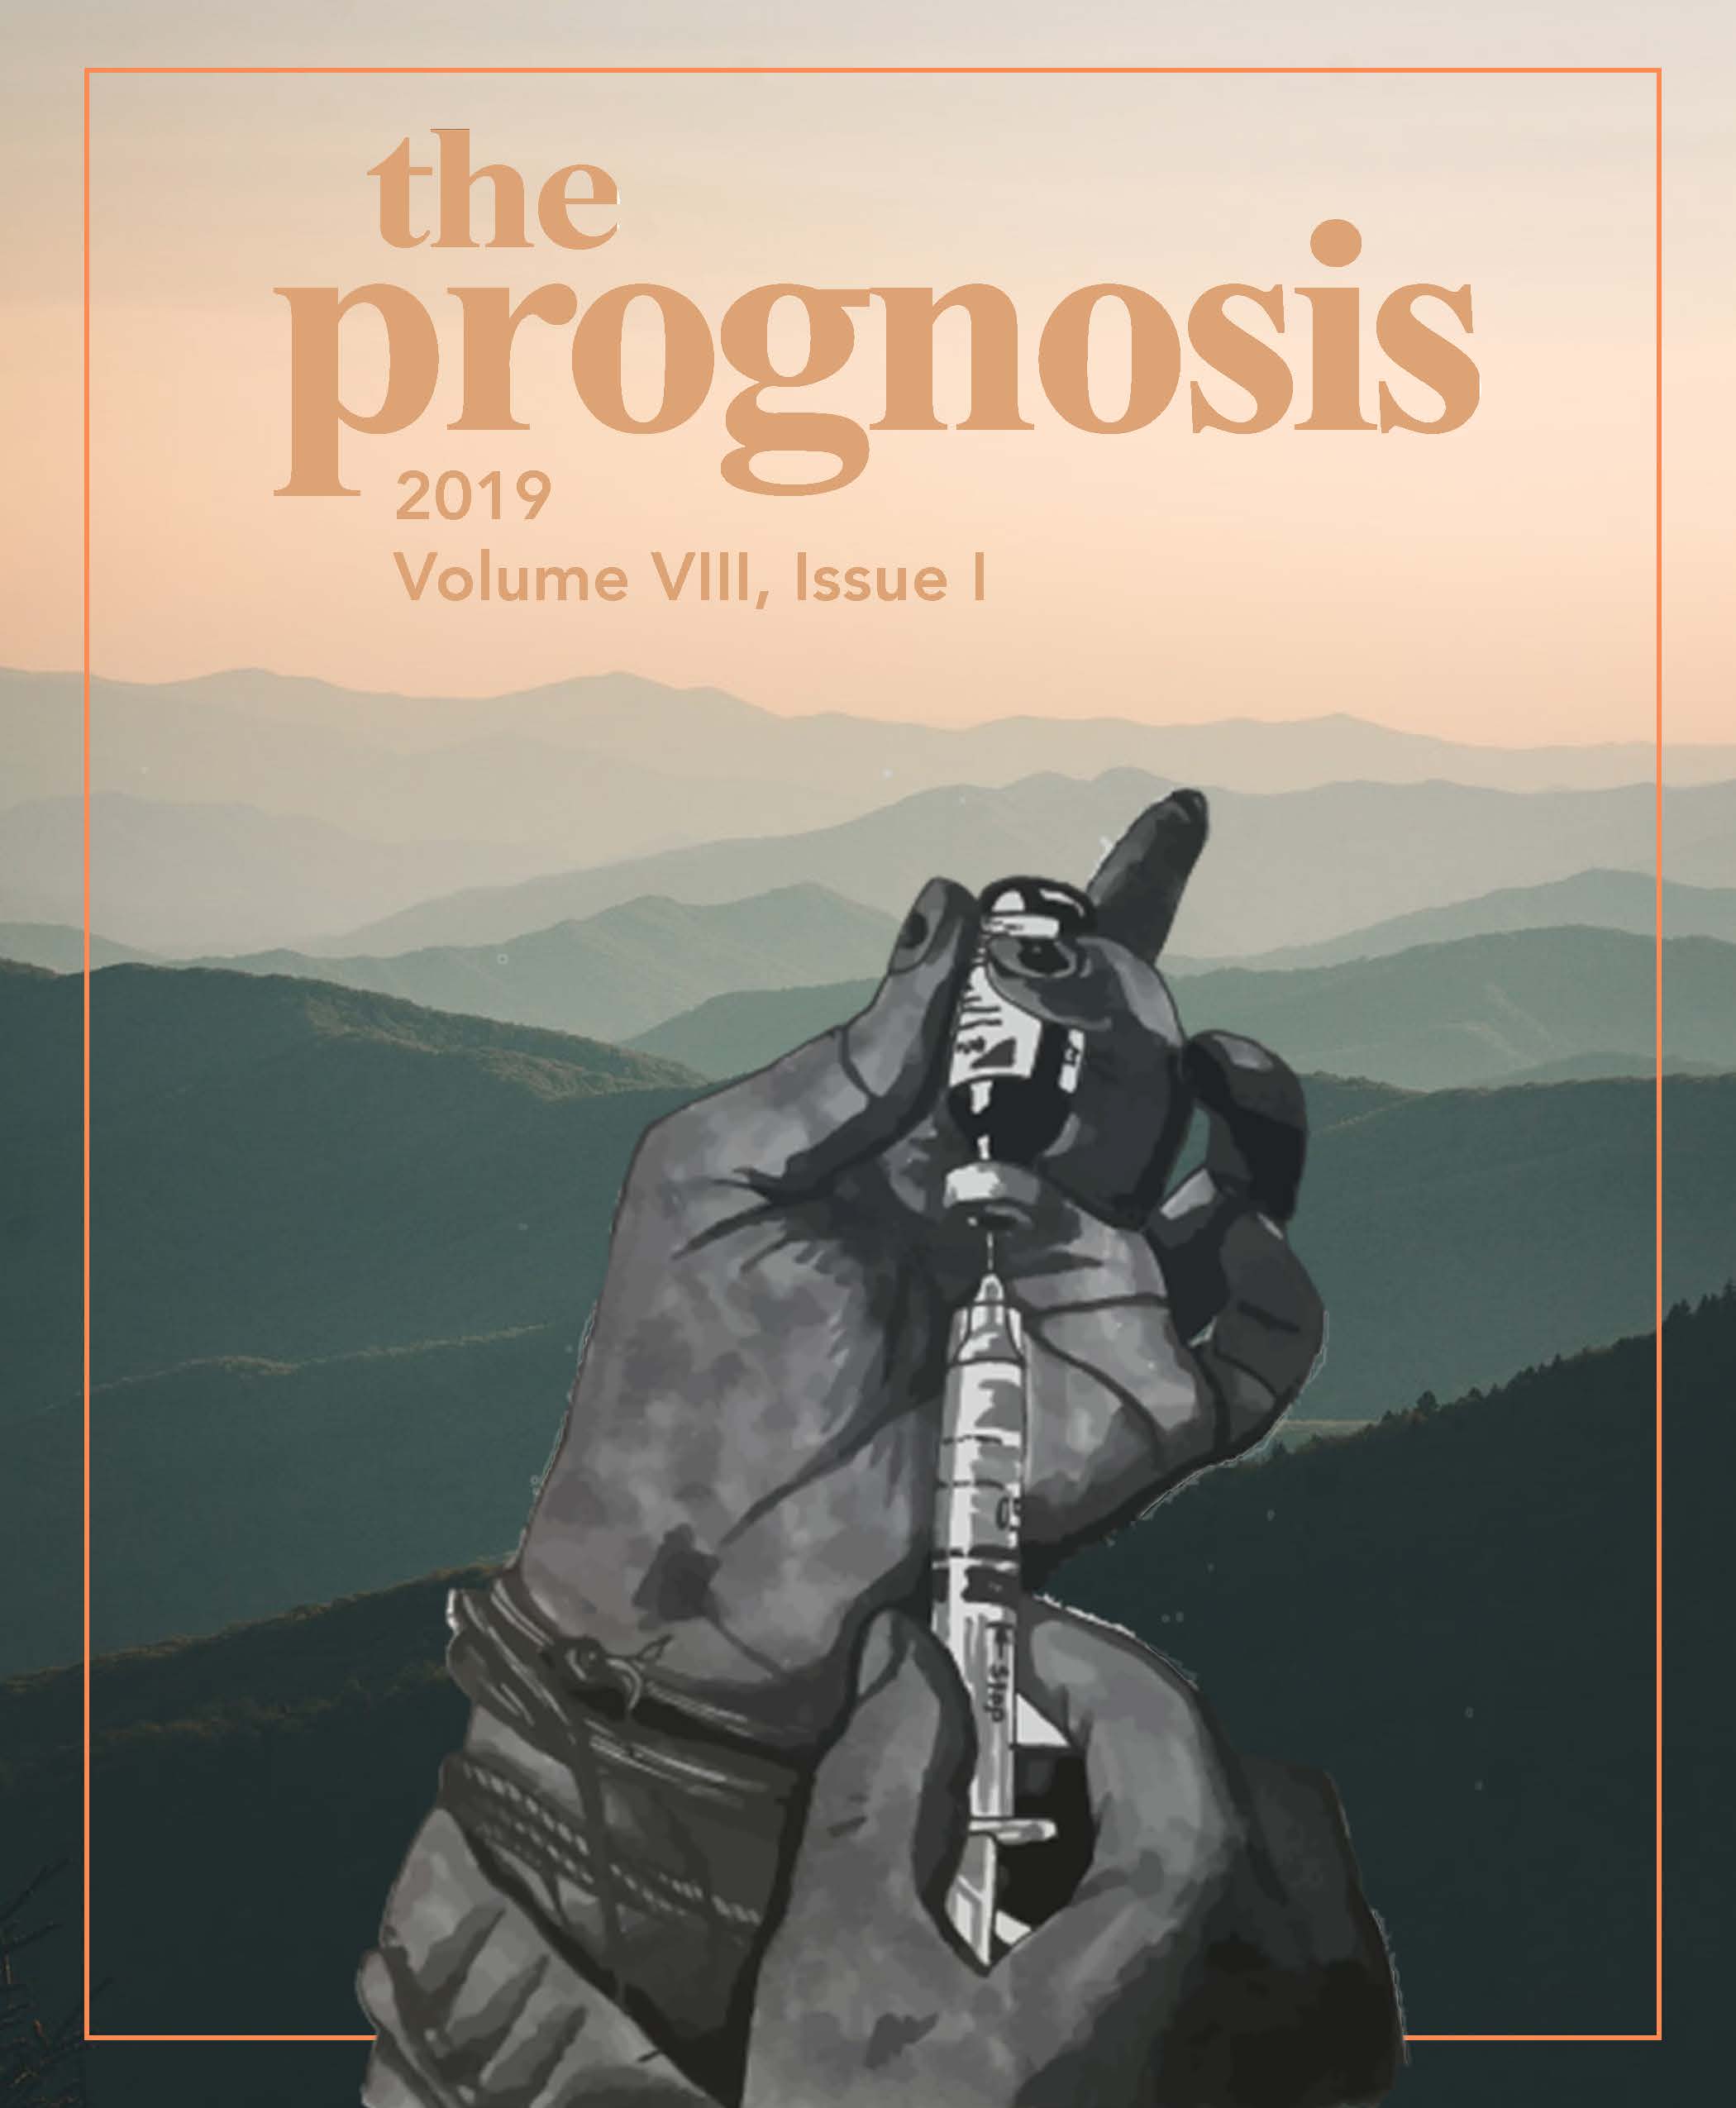 The Prognosis 2019 volume 8, issue 1 cover image - hands loading a vaccine into a syringe